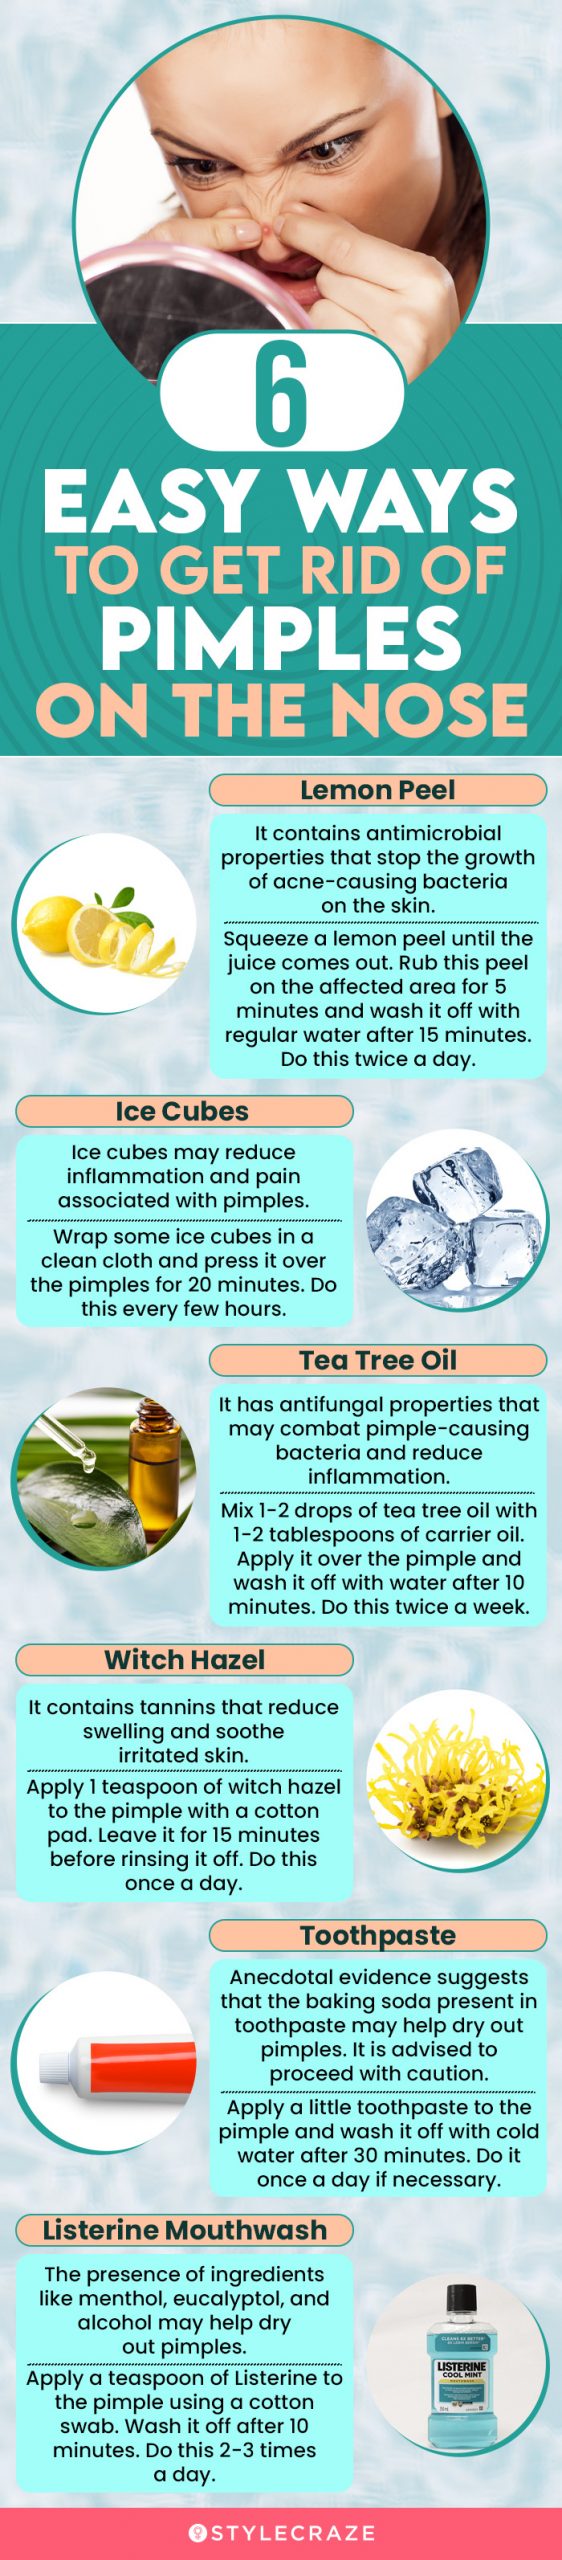 6 easy ways to get rid of pimples on the nose (infographic)